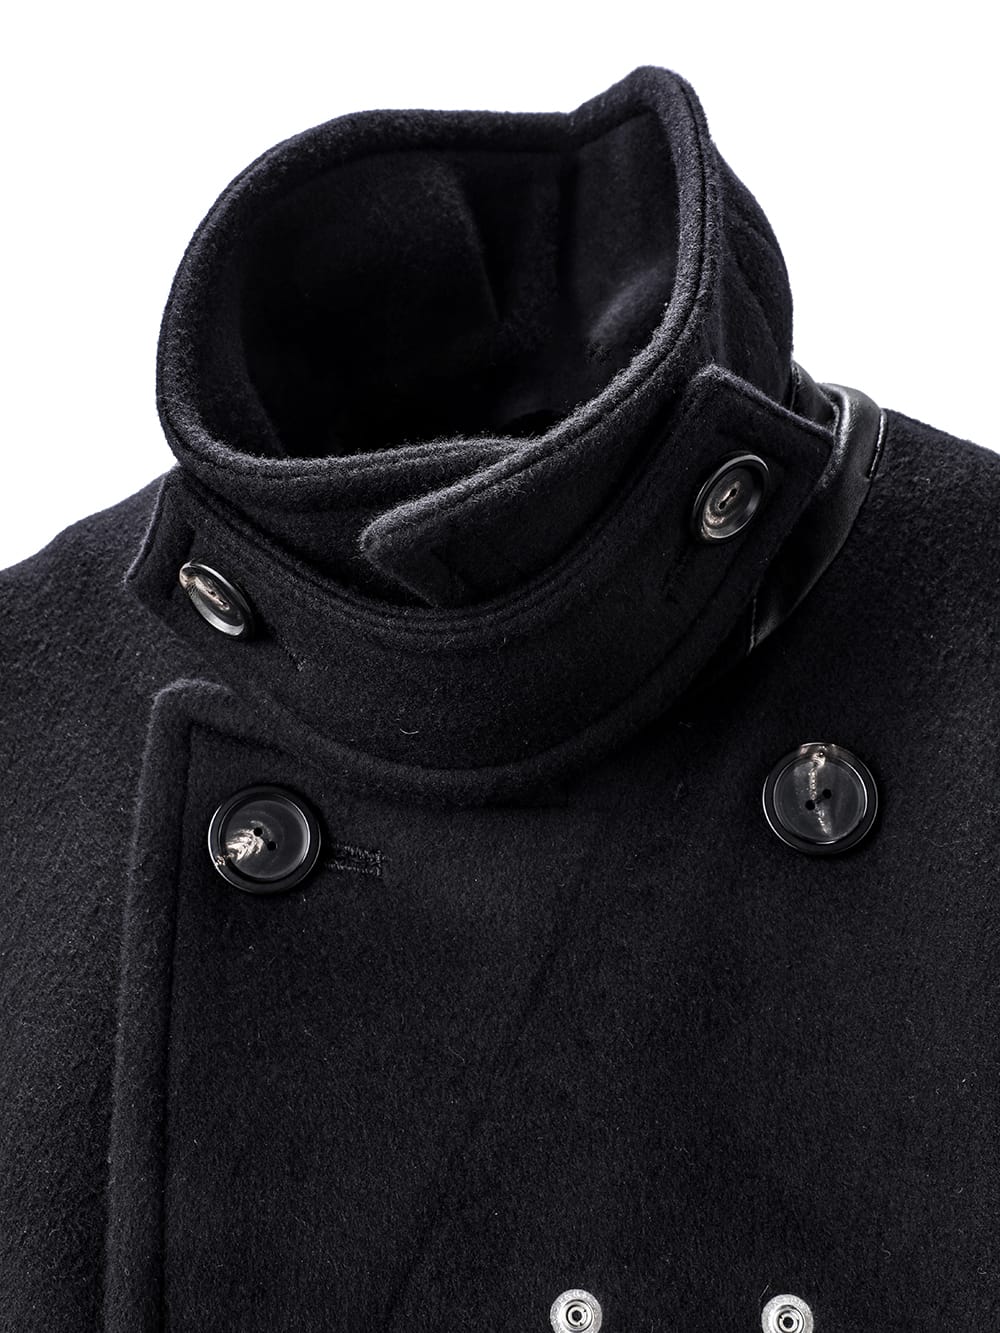 right - left pencil silhouette double-breasted pea coat